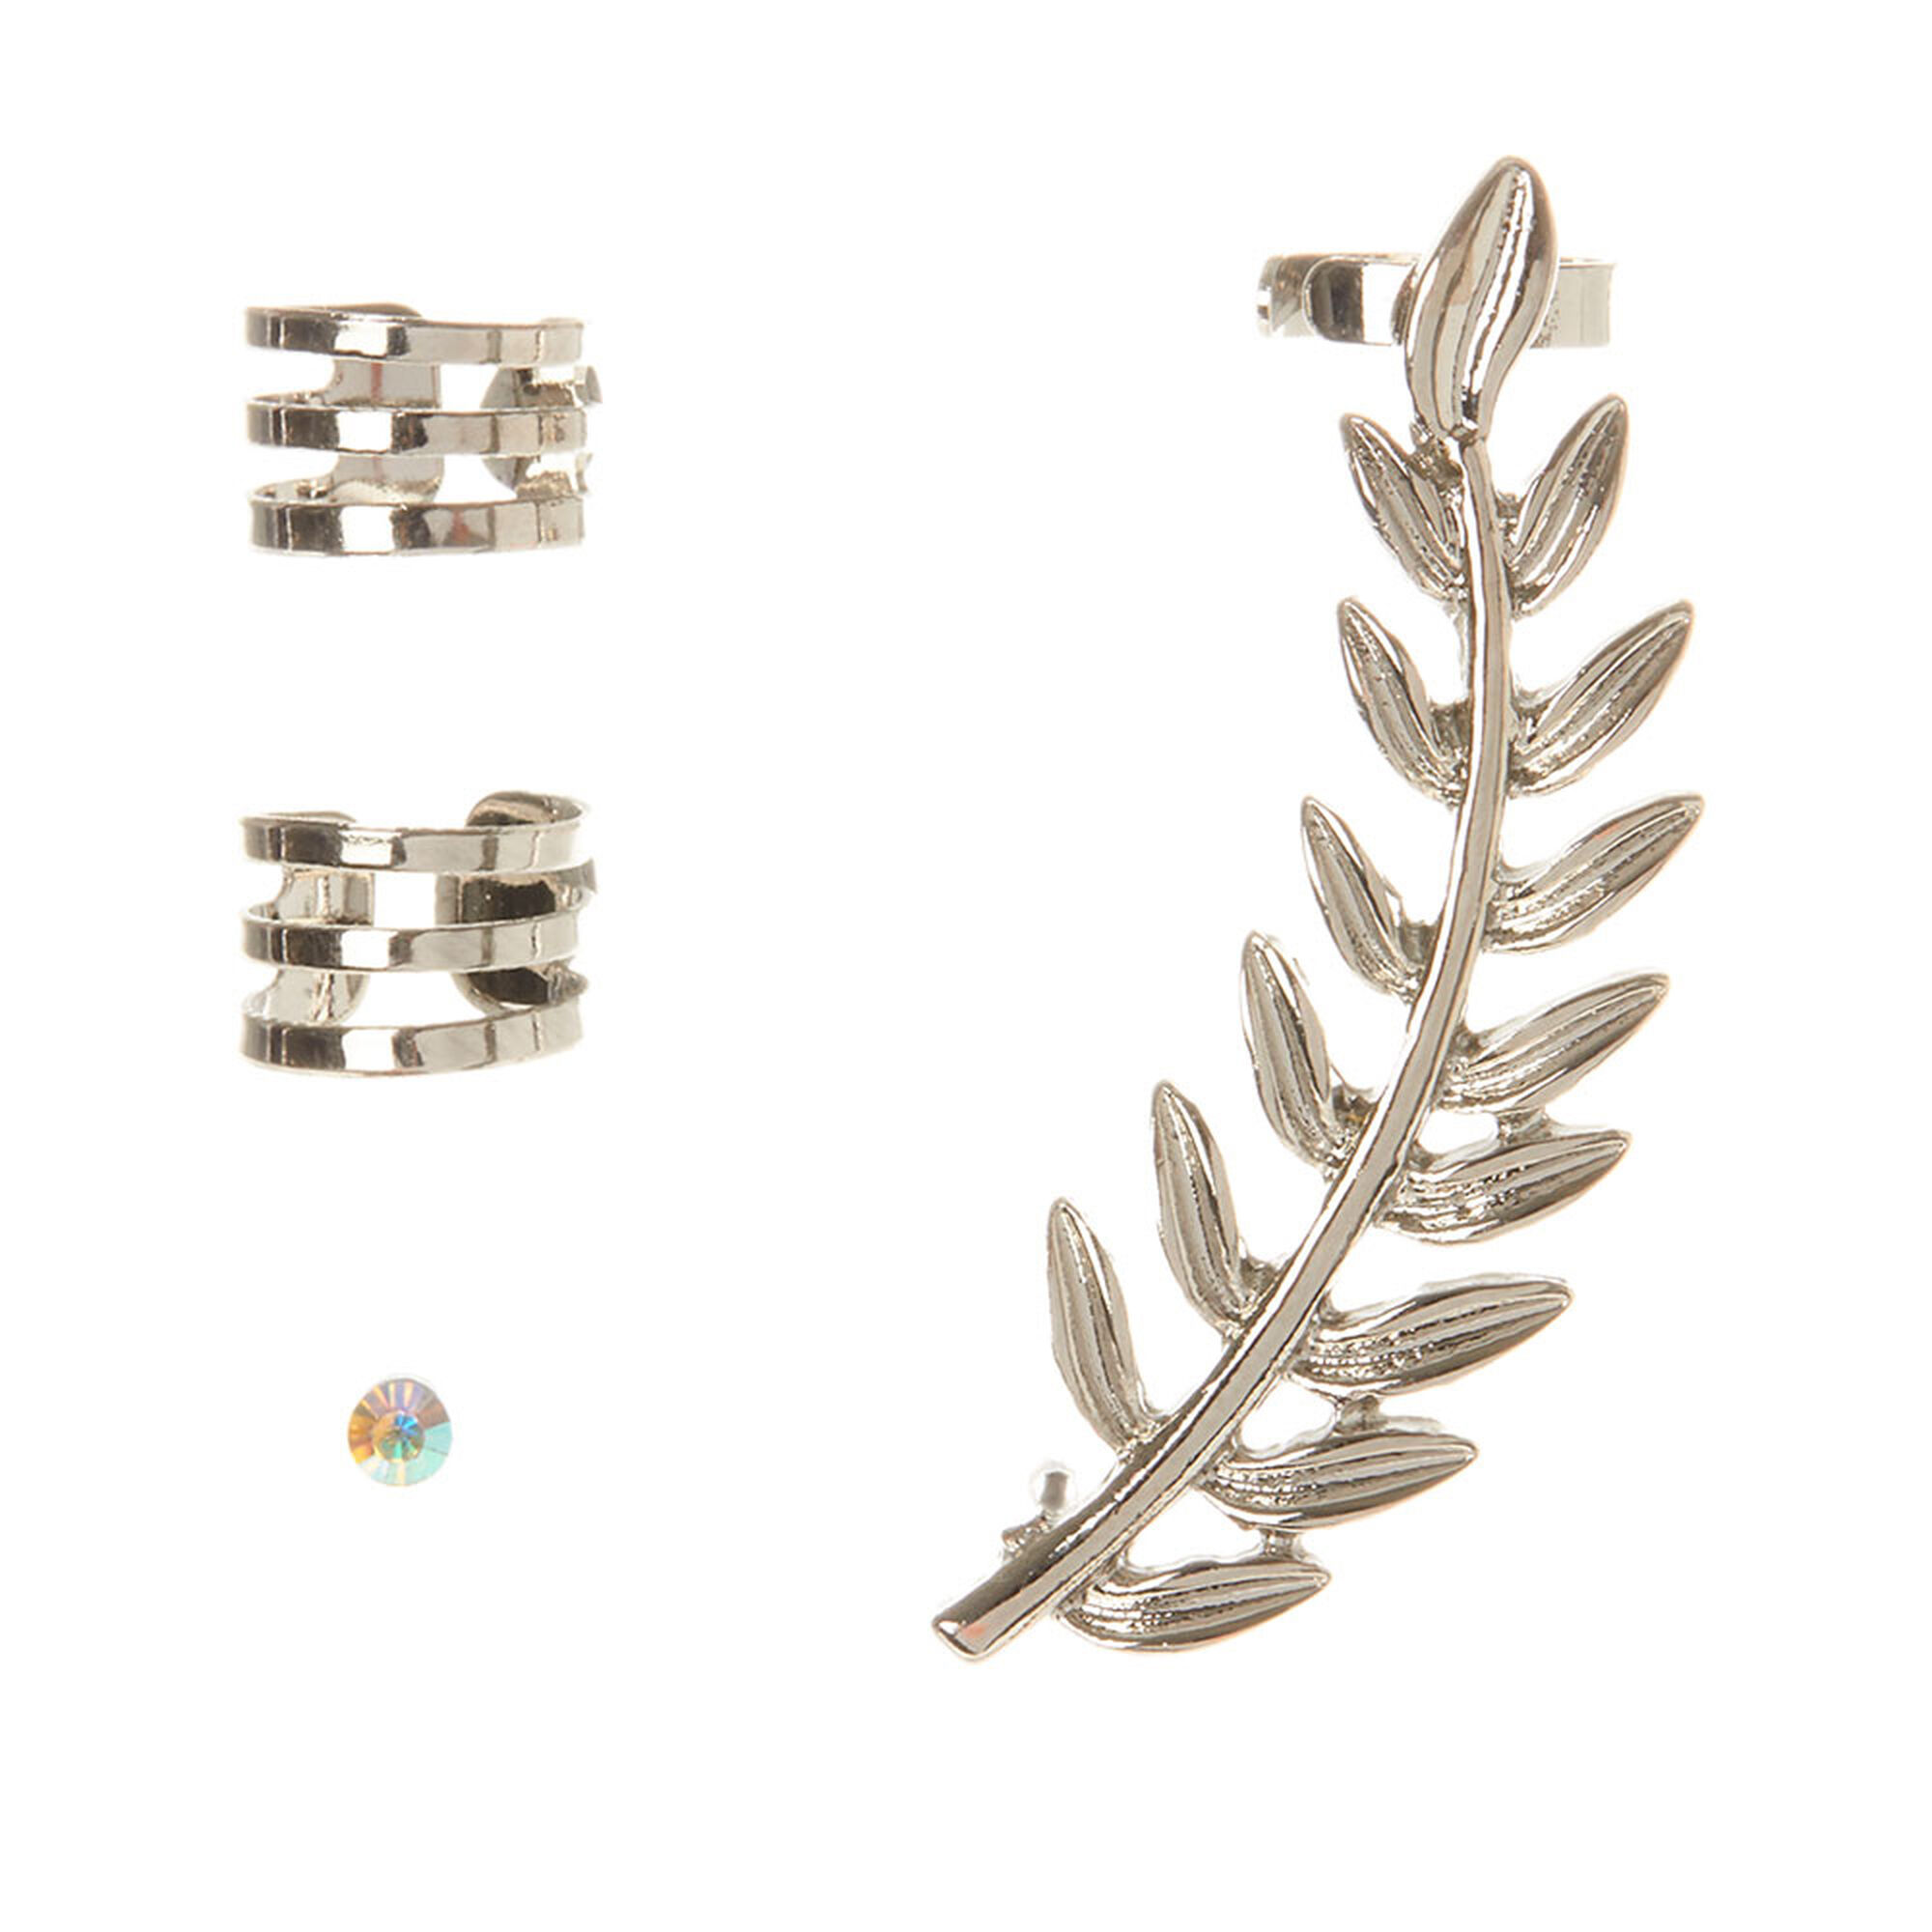 View Claires Leaf Ear Cuff Stud Earring Set 4 Pack Silver information